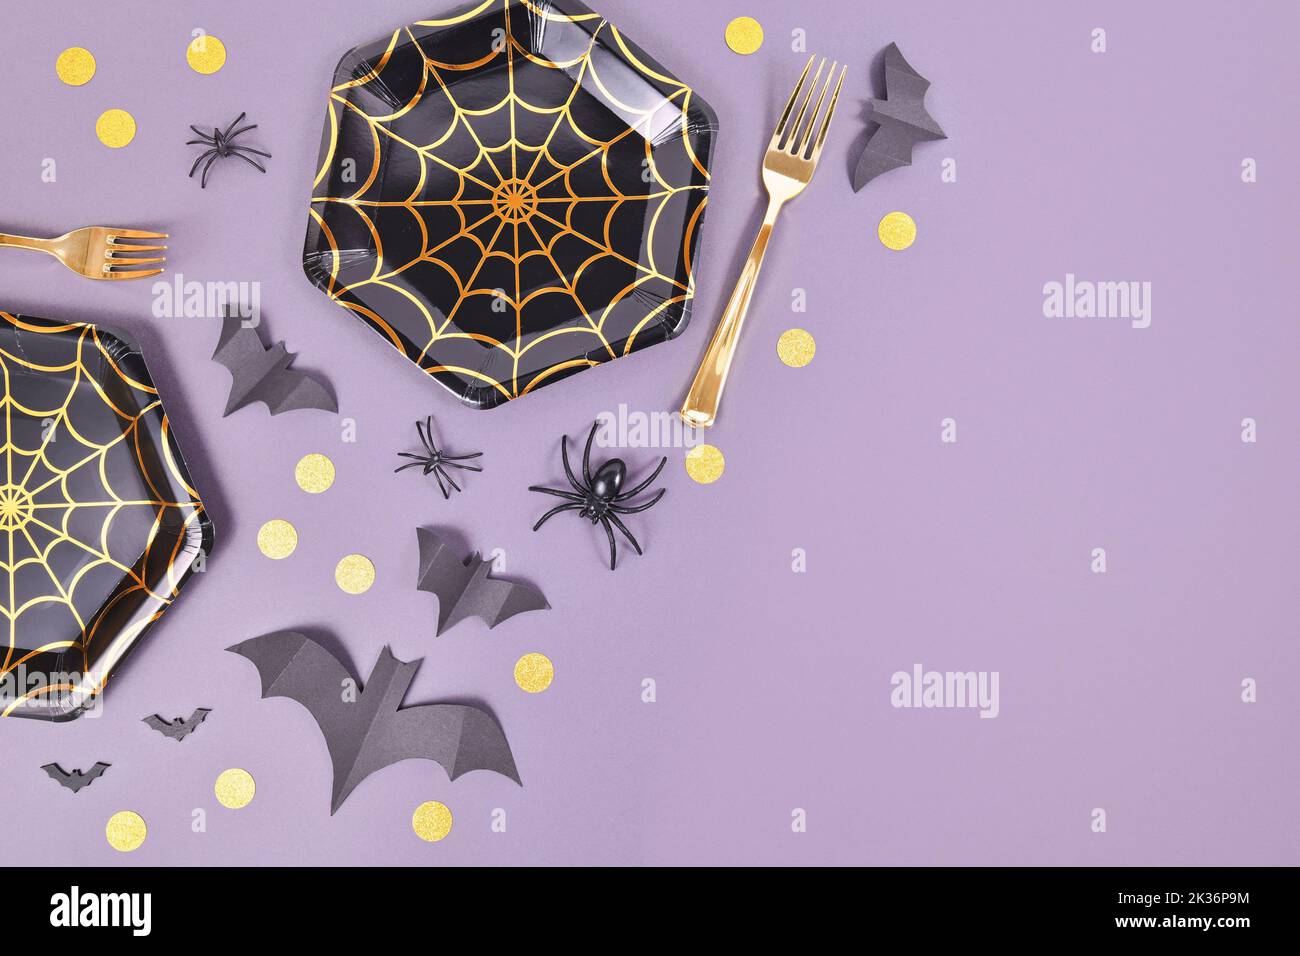 Halloween party flat lay with spider web plates, spiders and confetti on violet background with copy space Stock Photo